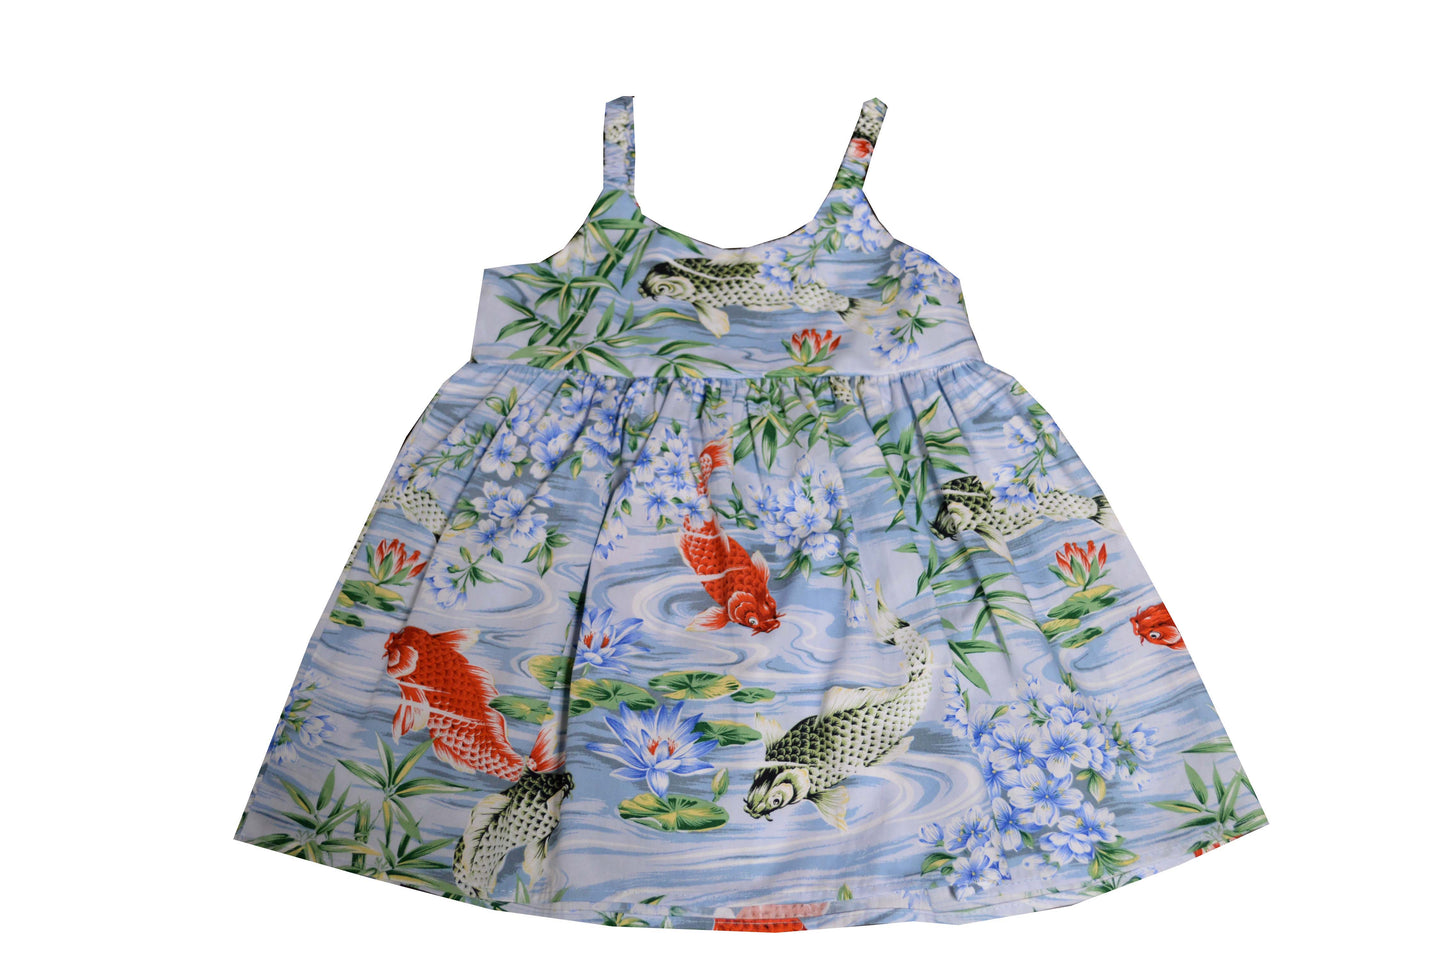 Koi Fish Sunny Bungee Dress for Little Girls Soft Cotton Made in Hawaii